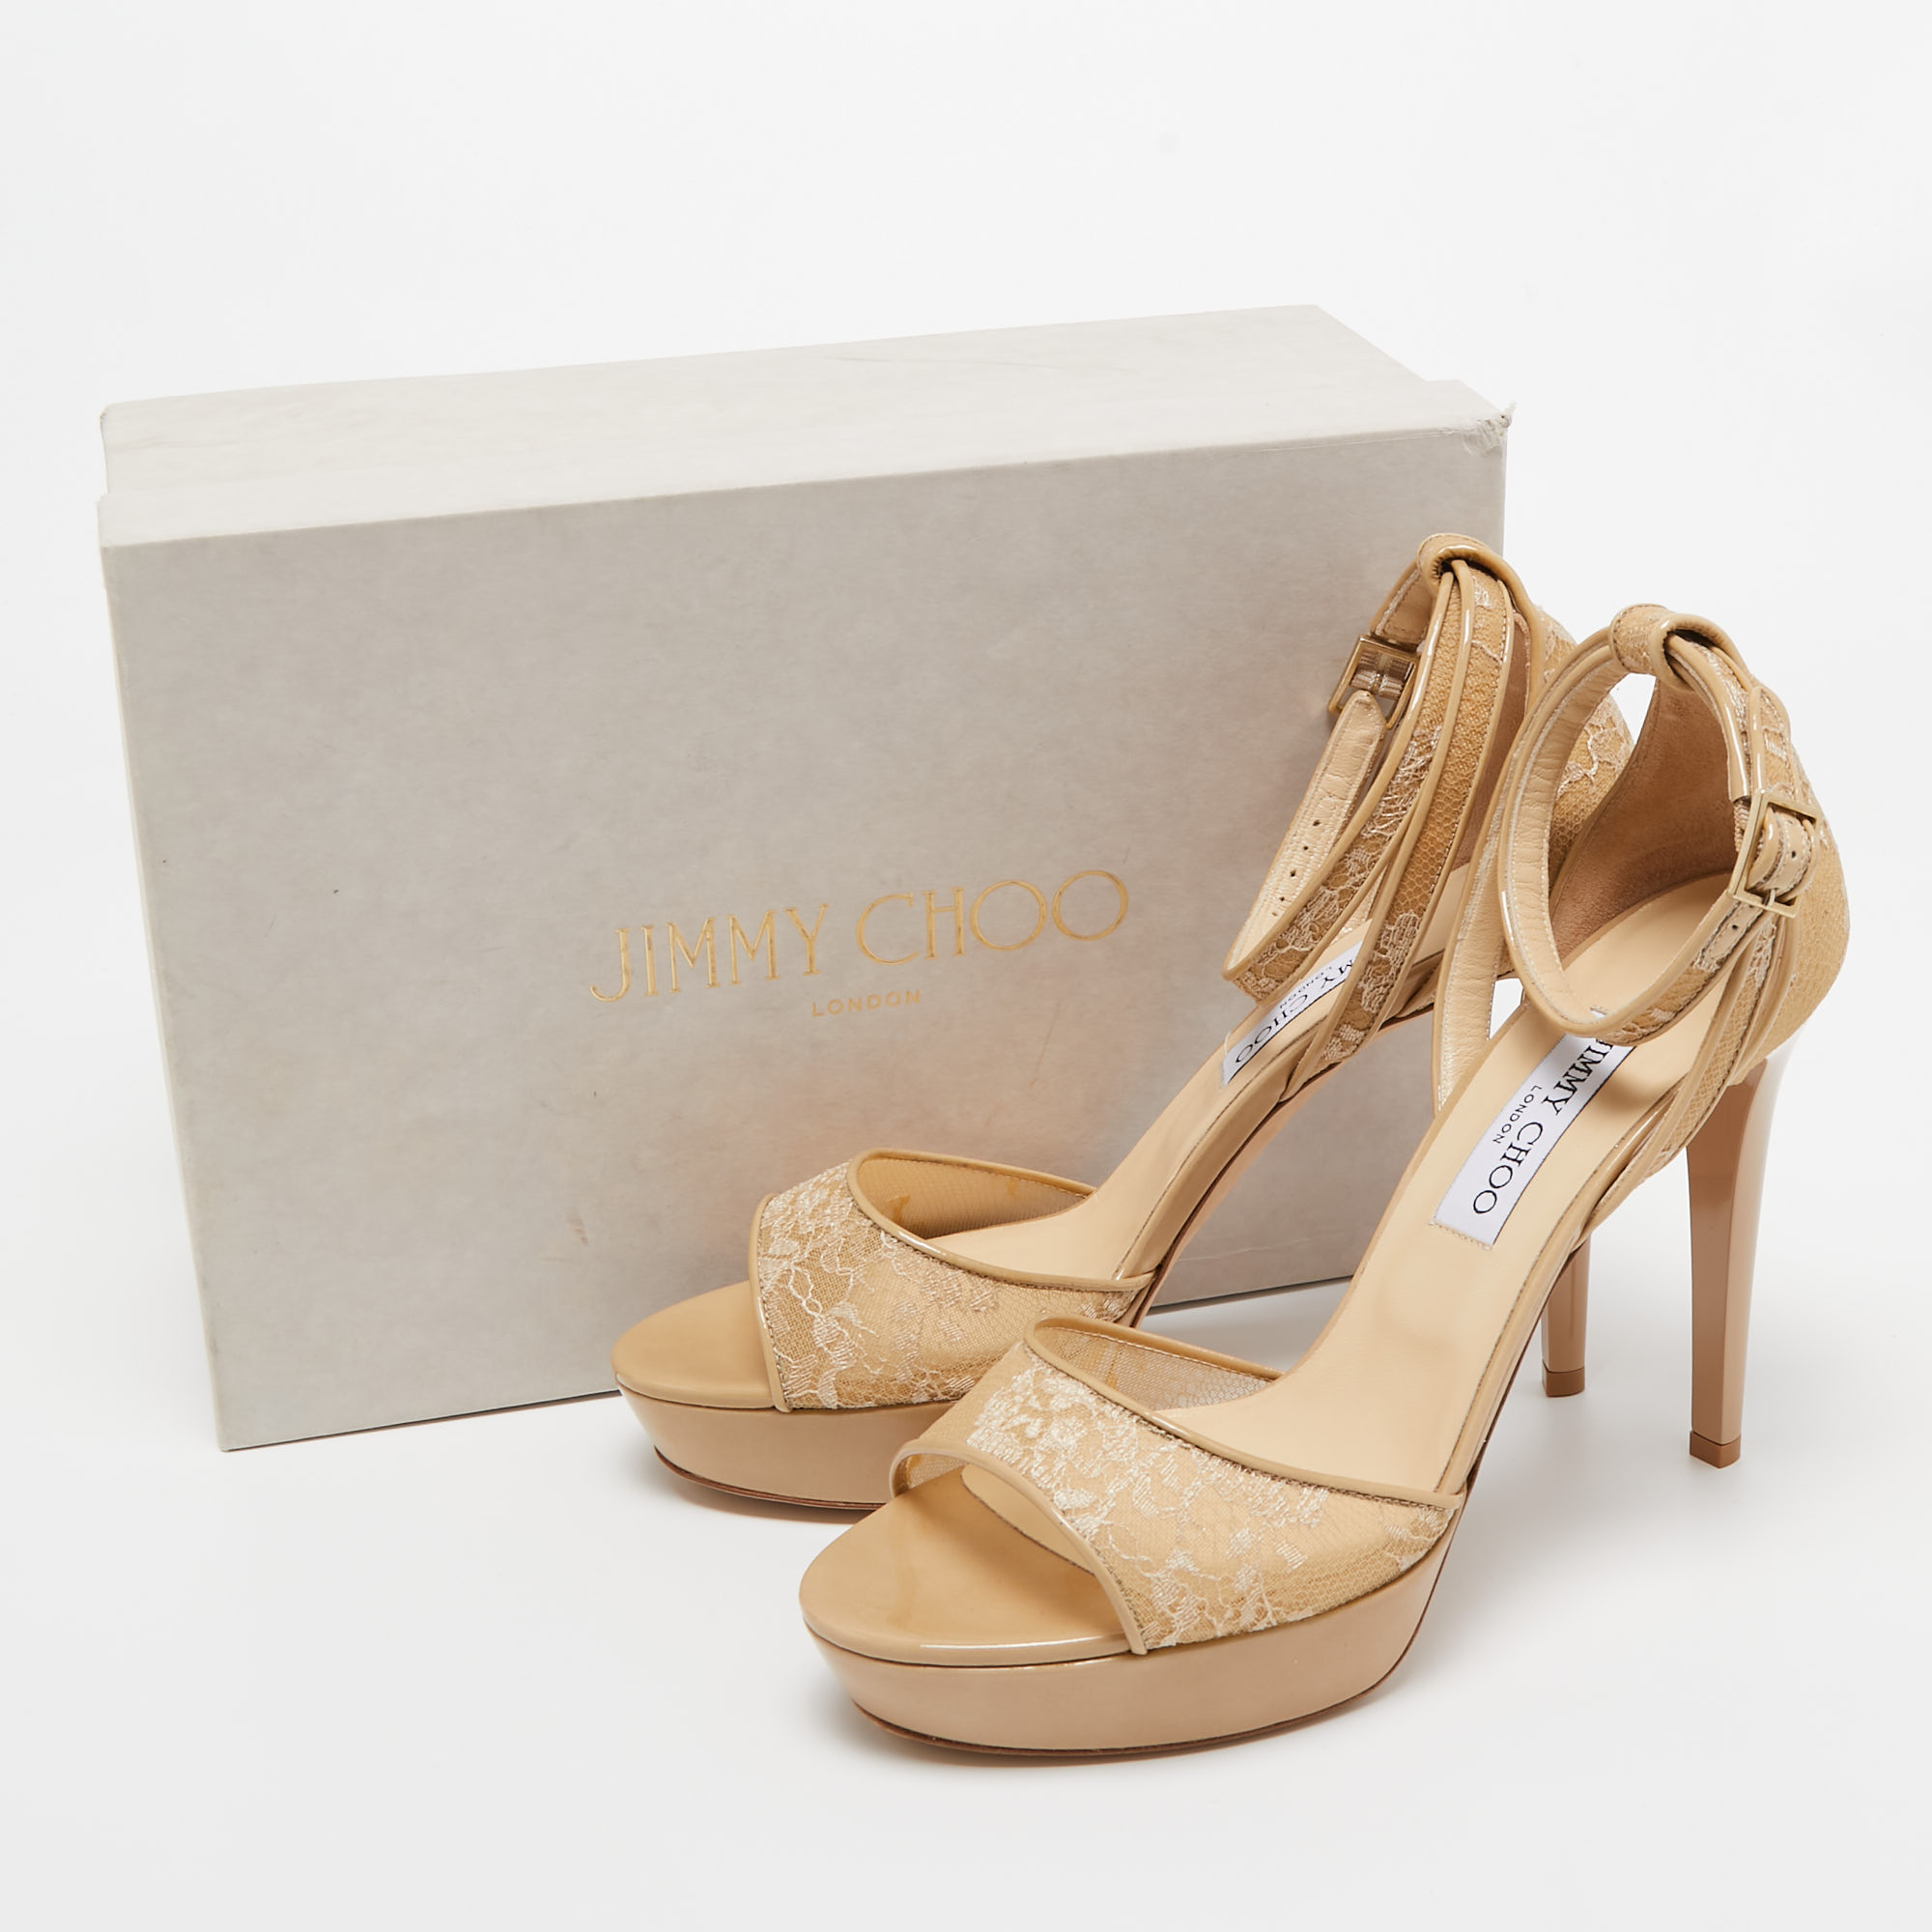 Jimmy Choo Beige Lace And Patent Leather Kayden Ankle Strap Platform Sandals Size 41